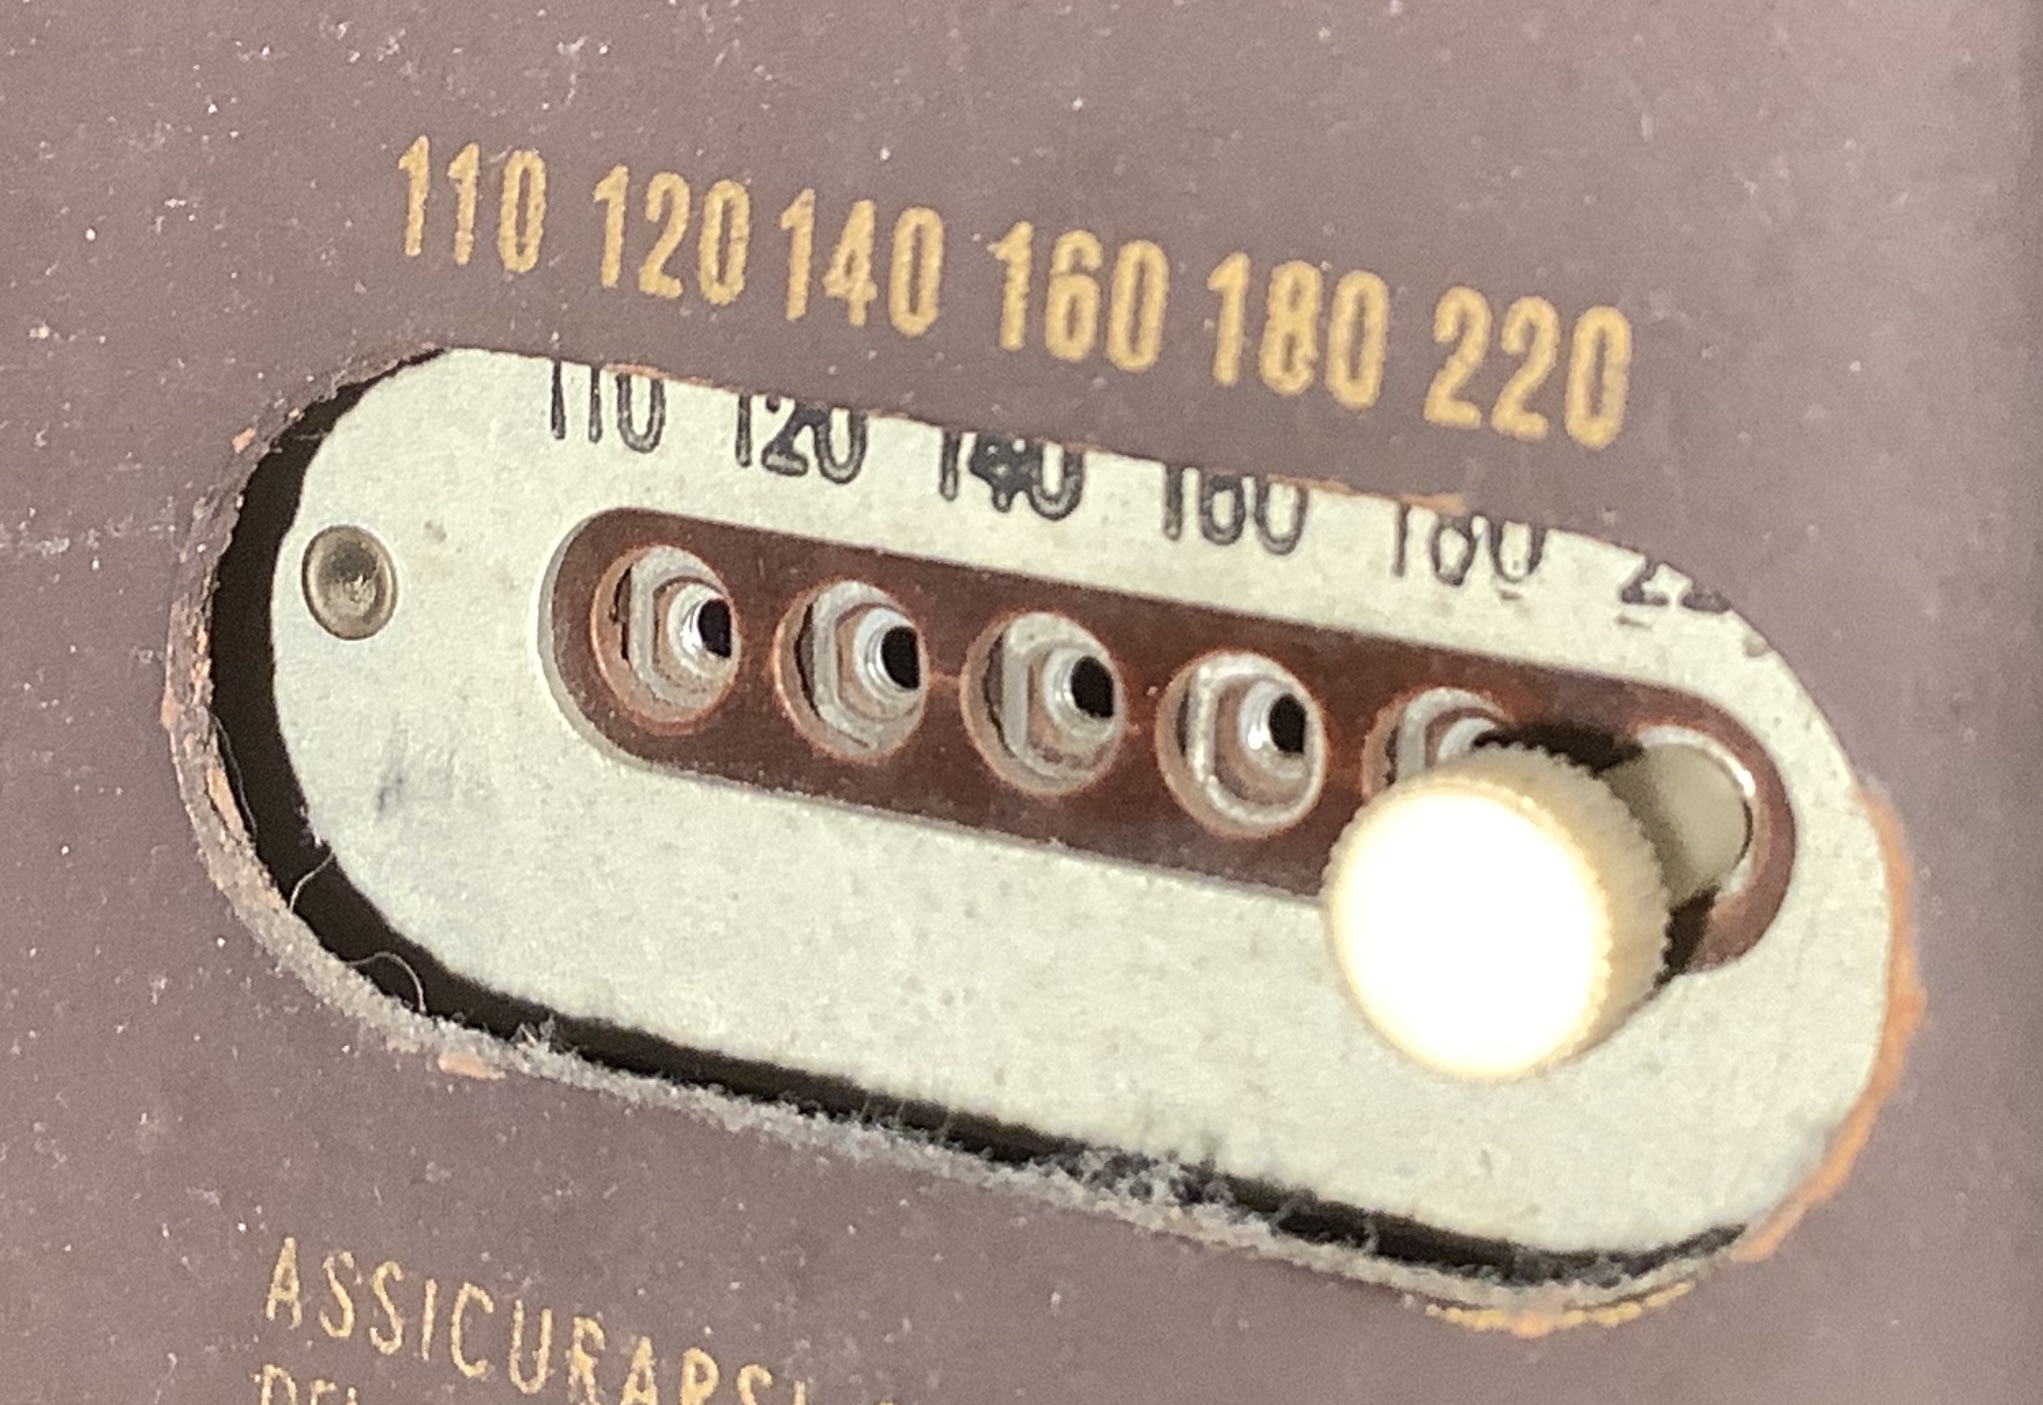 A voltage selector switch, found on an old tube radio. Taps for many different voltages are present.